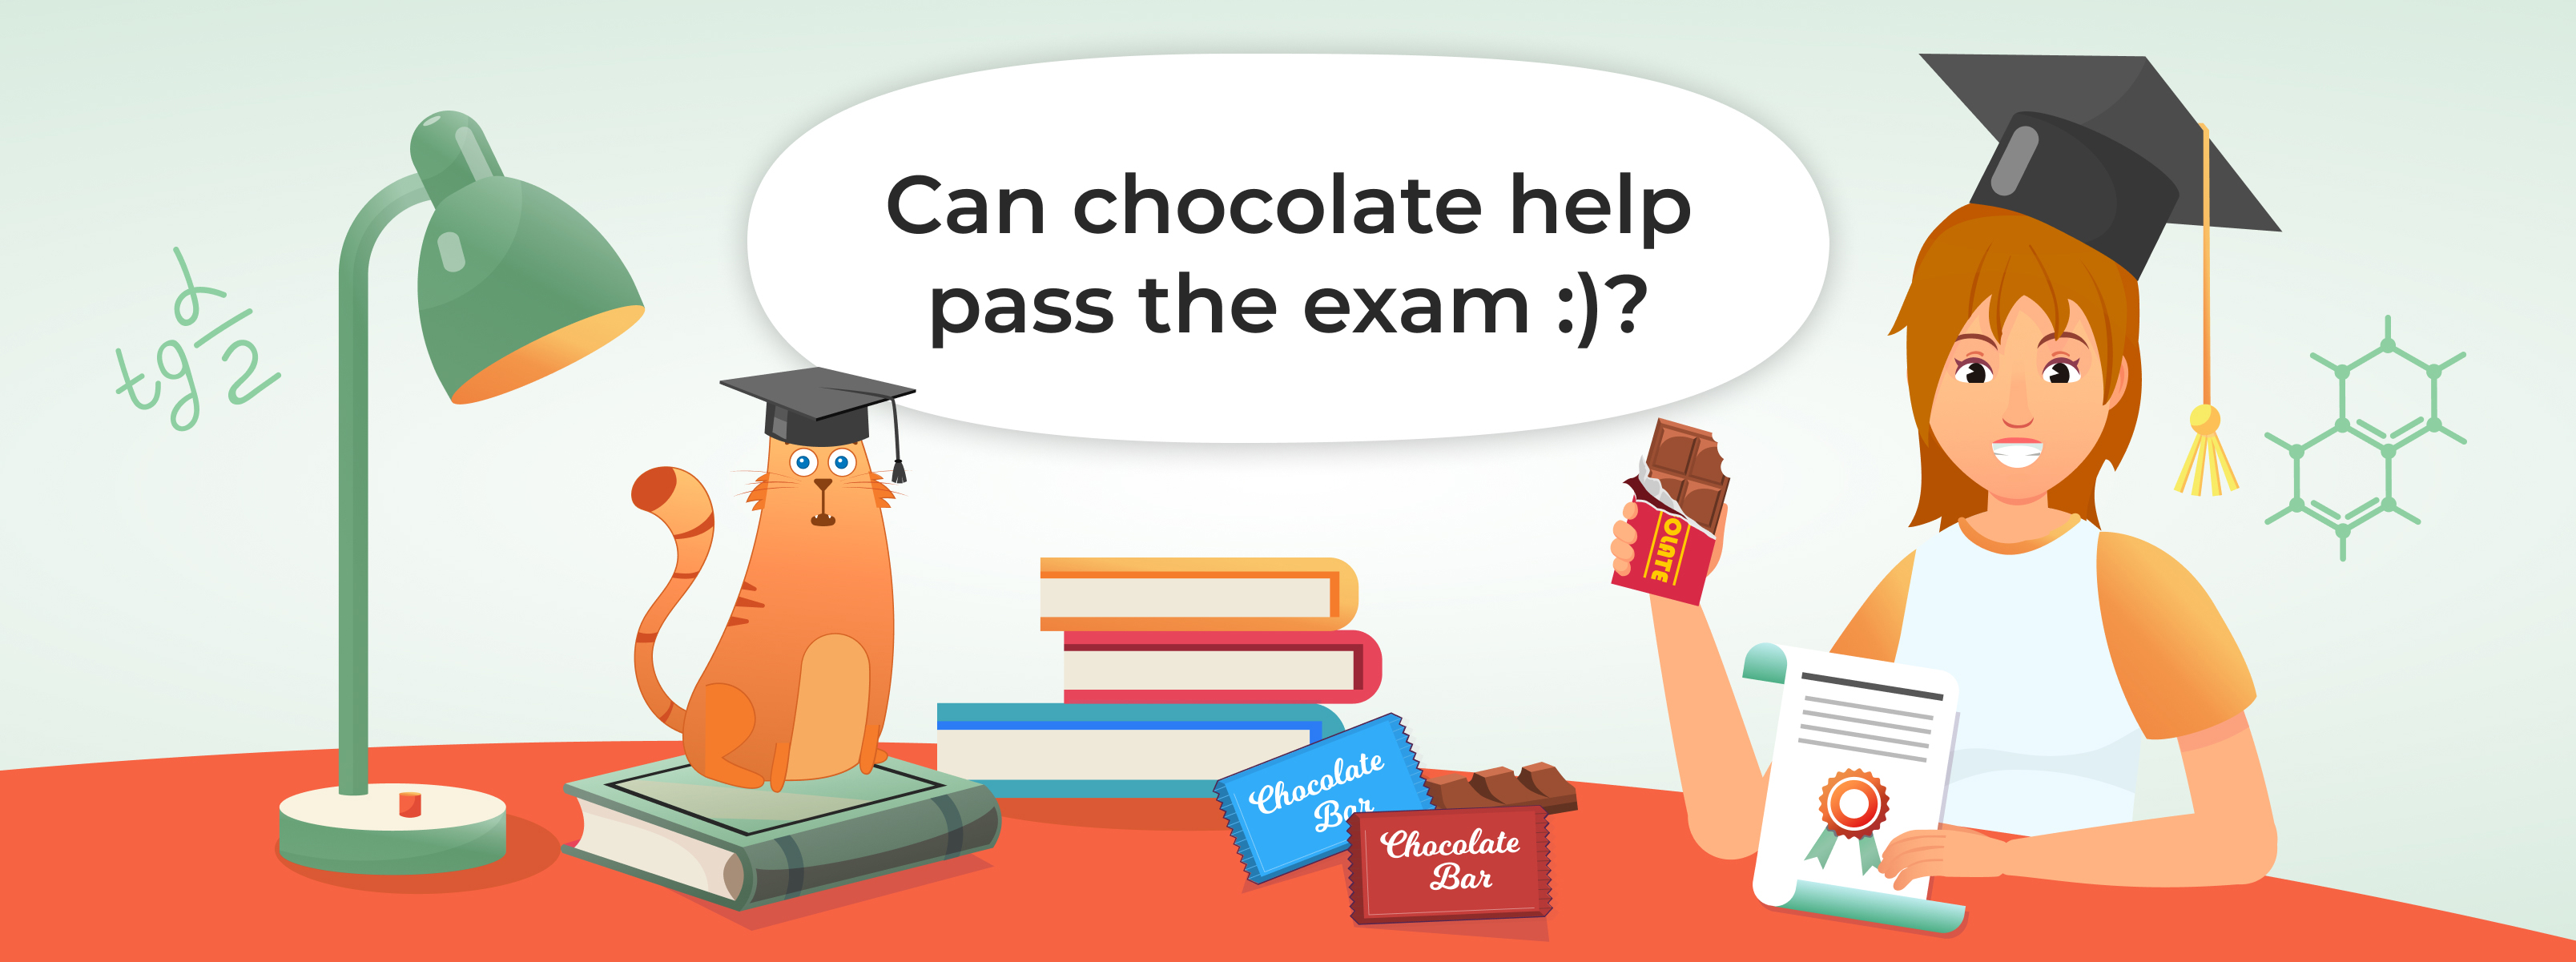 Can chocolate help pass the exam?